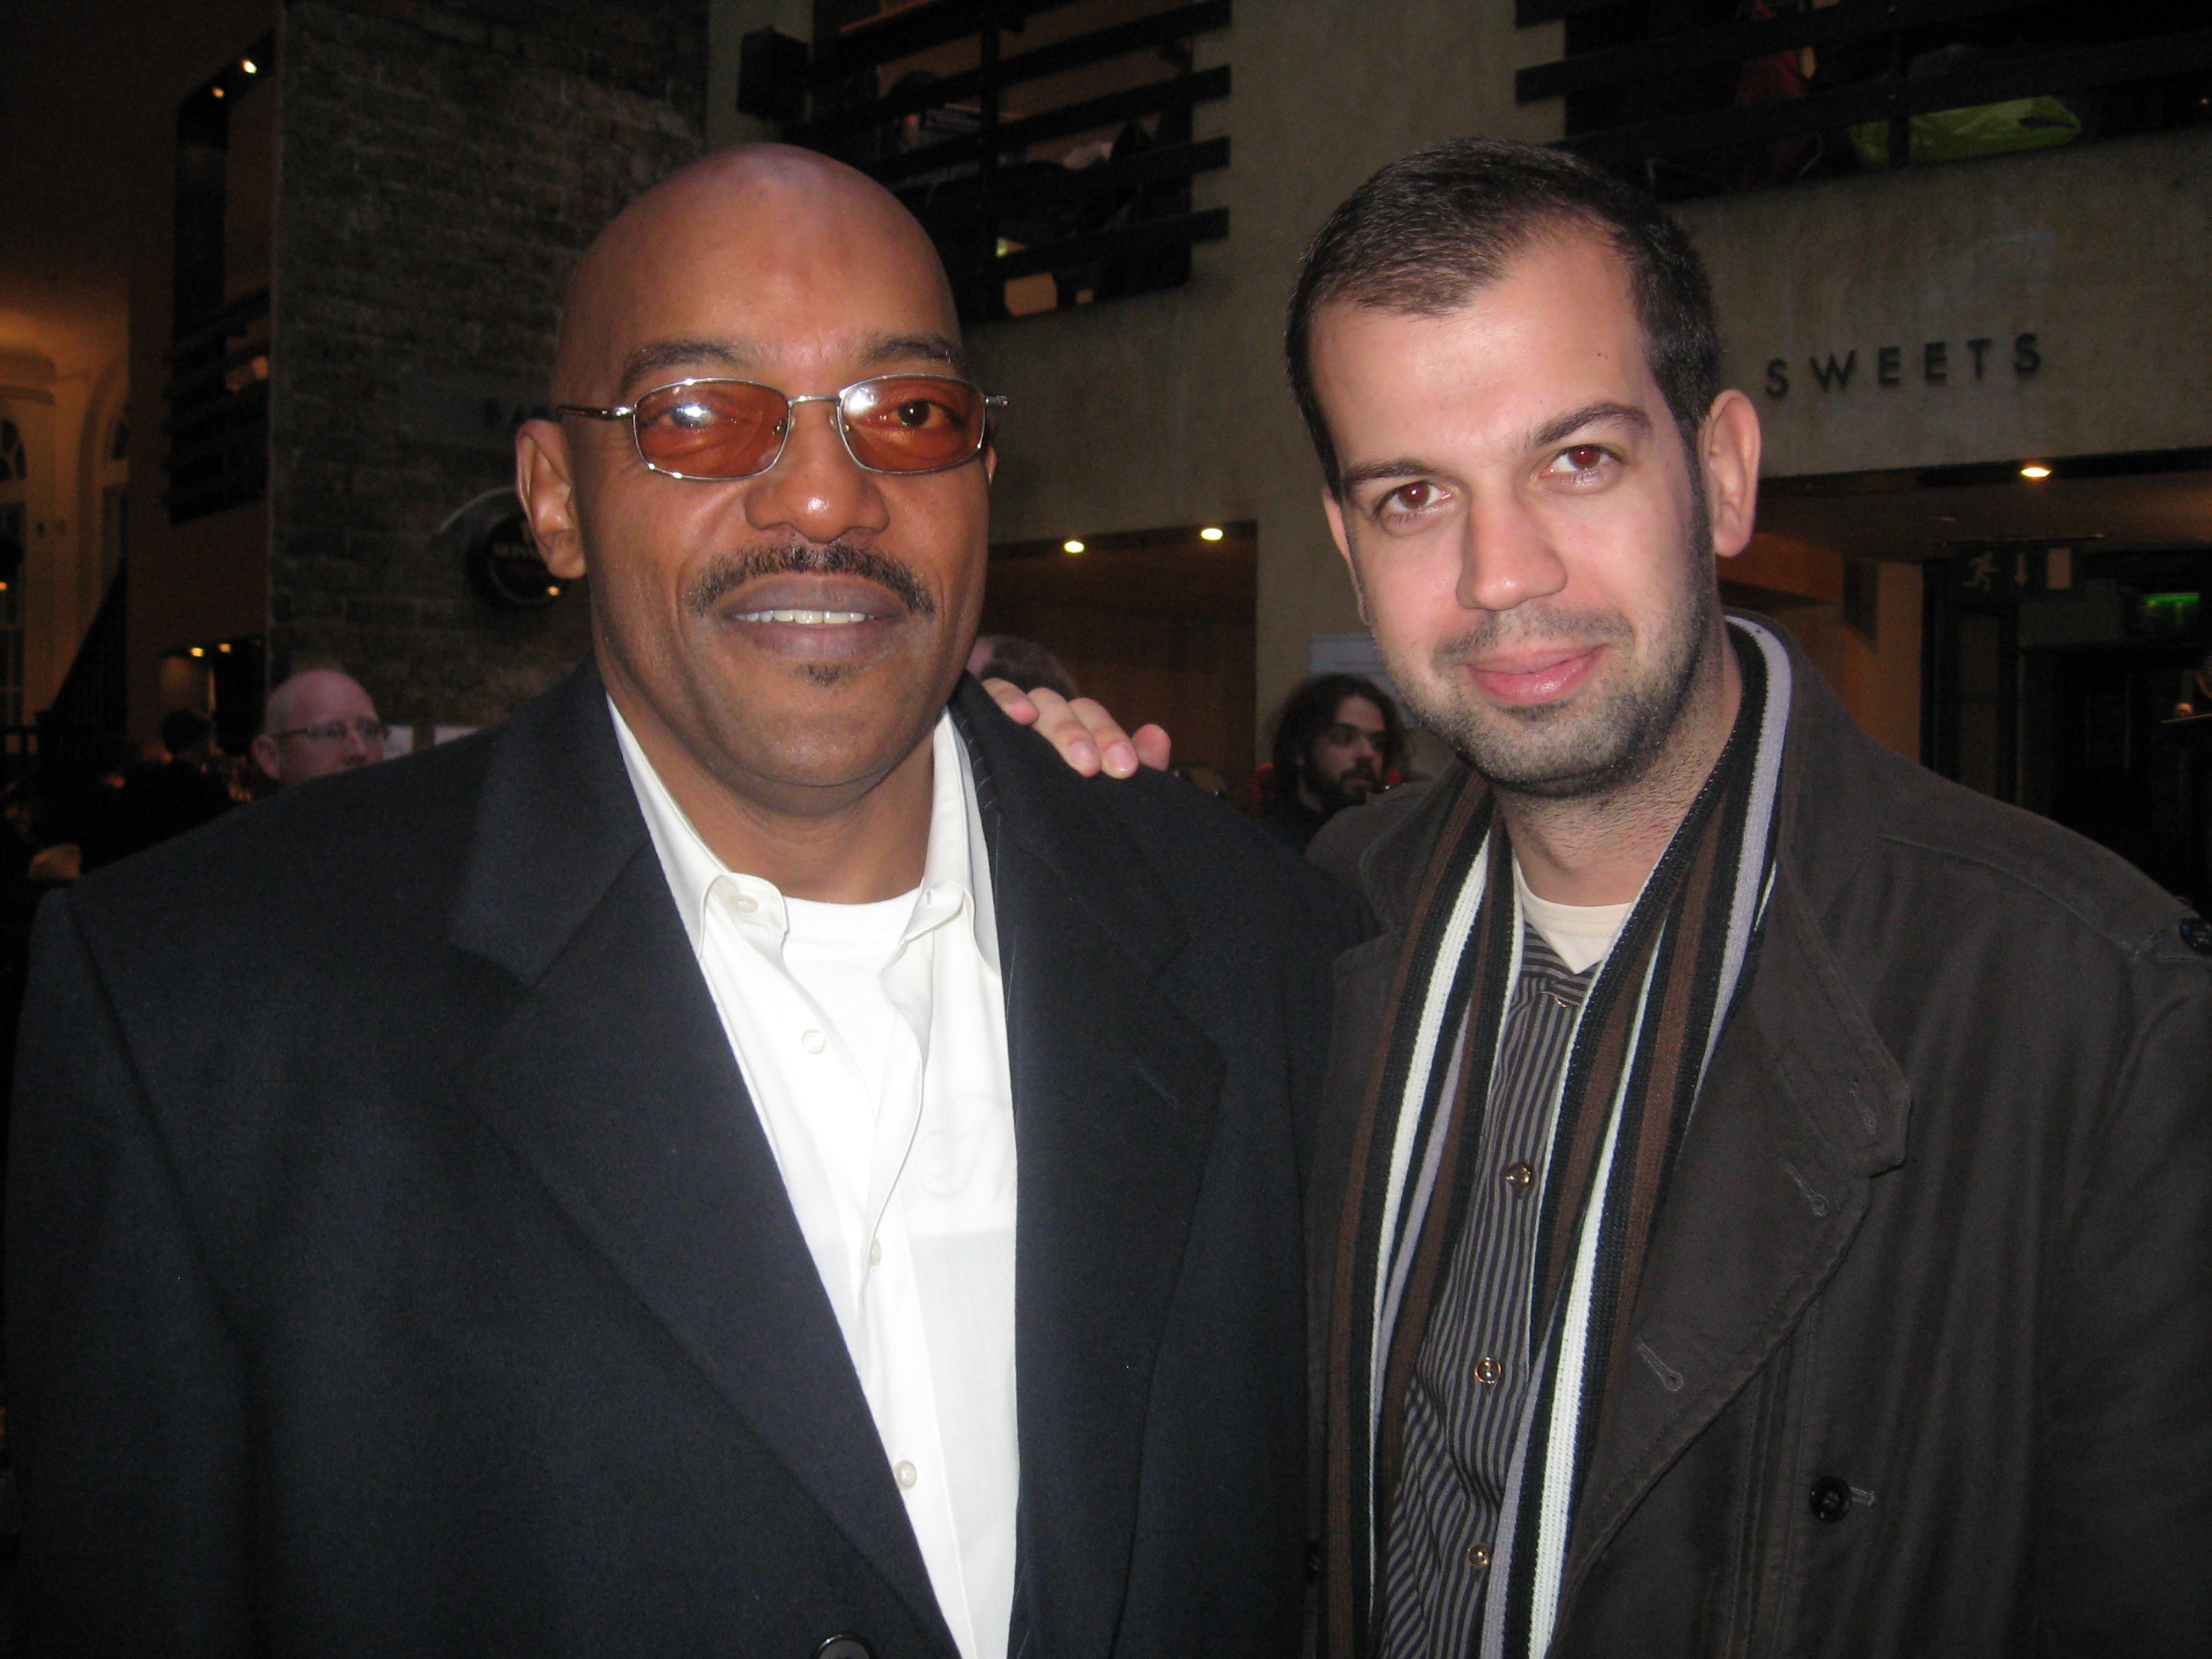 Milan Todorovic and Ken Foree at Dublin premiere of Zone of the Dead.